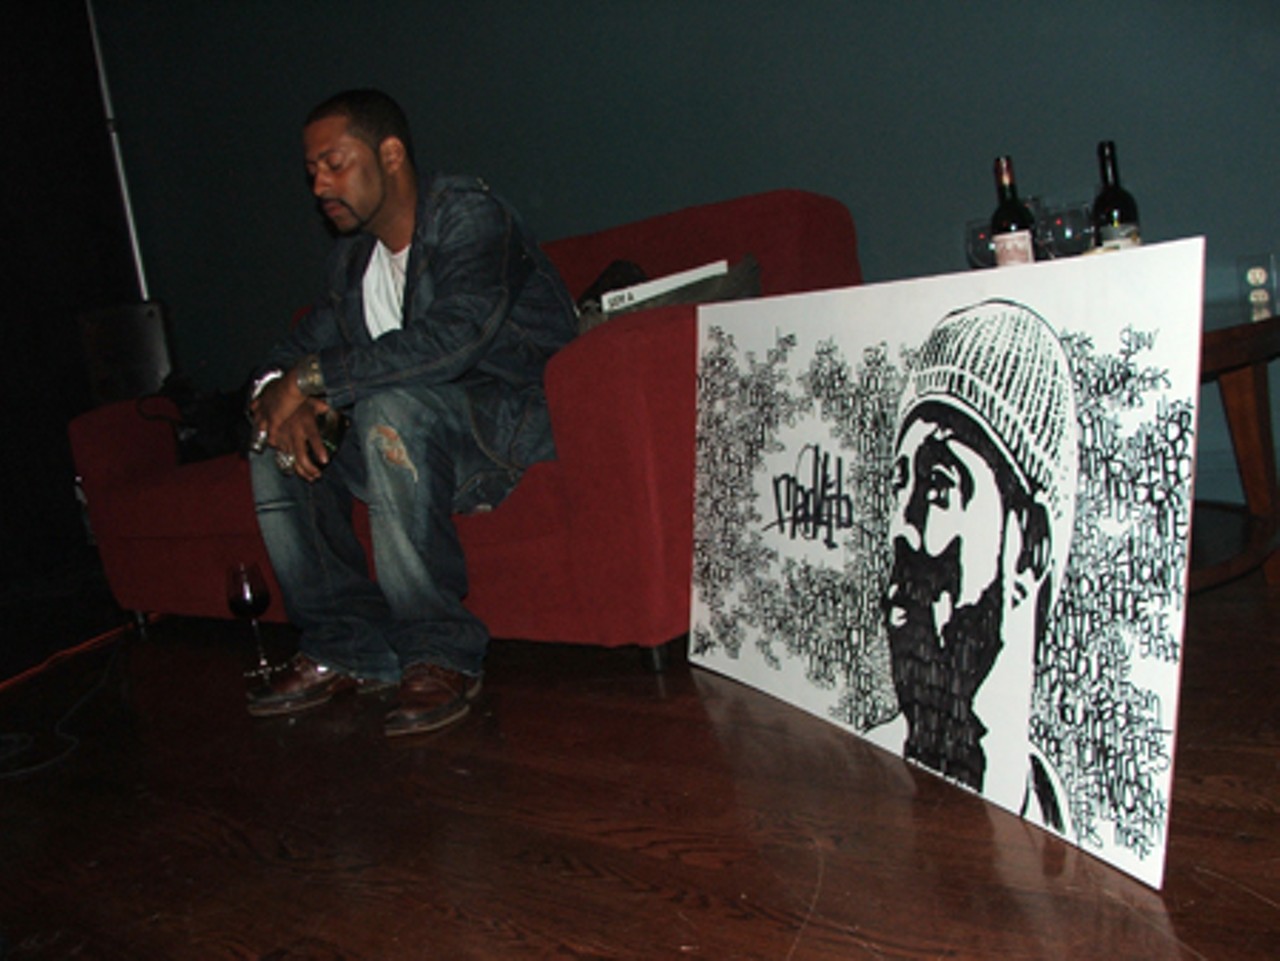 A quiet moment before Madlib's set.   On the right is a portrait drawn by a fan in what appeared to be Sharpie marker.